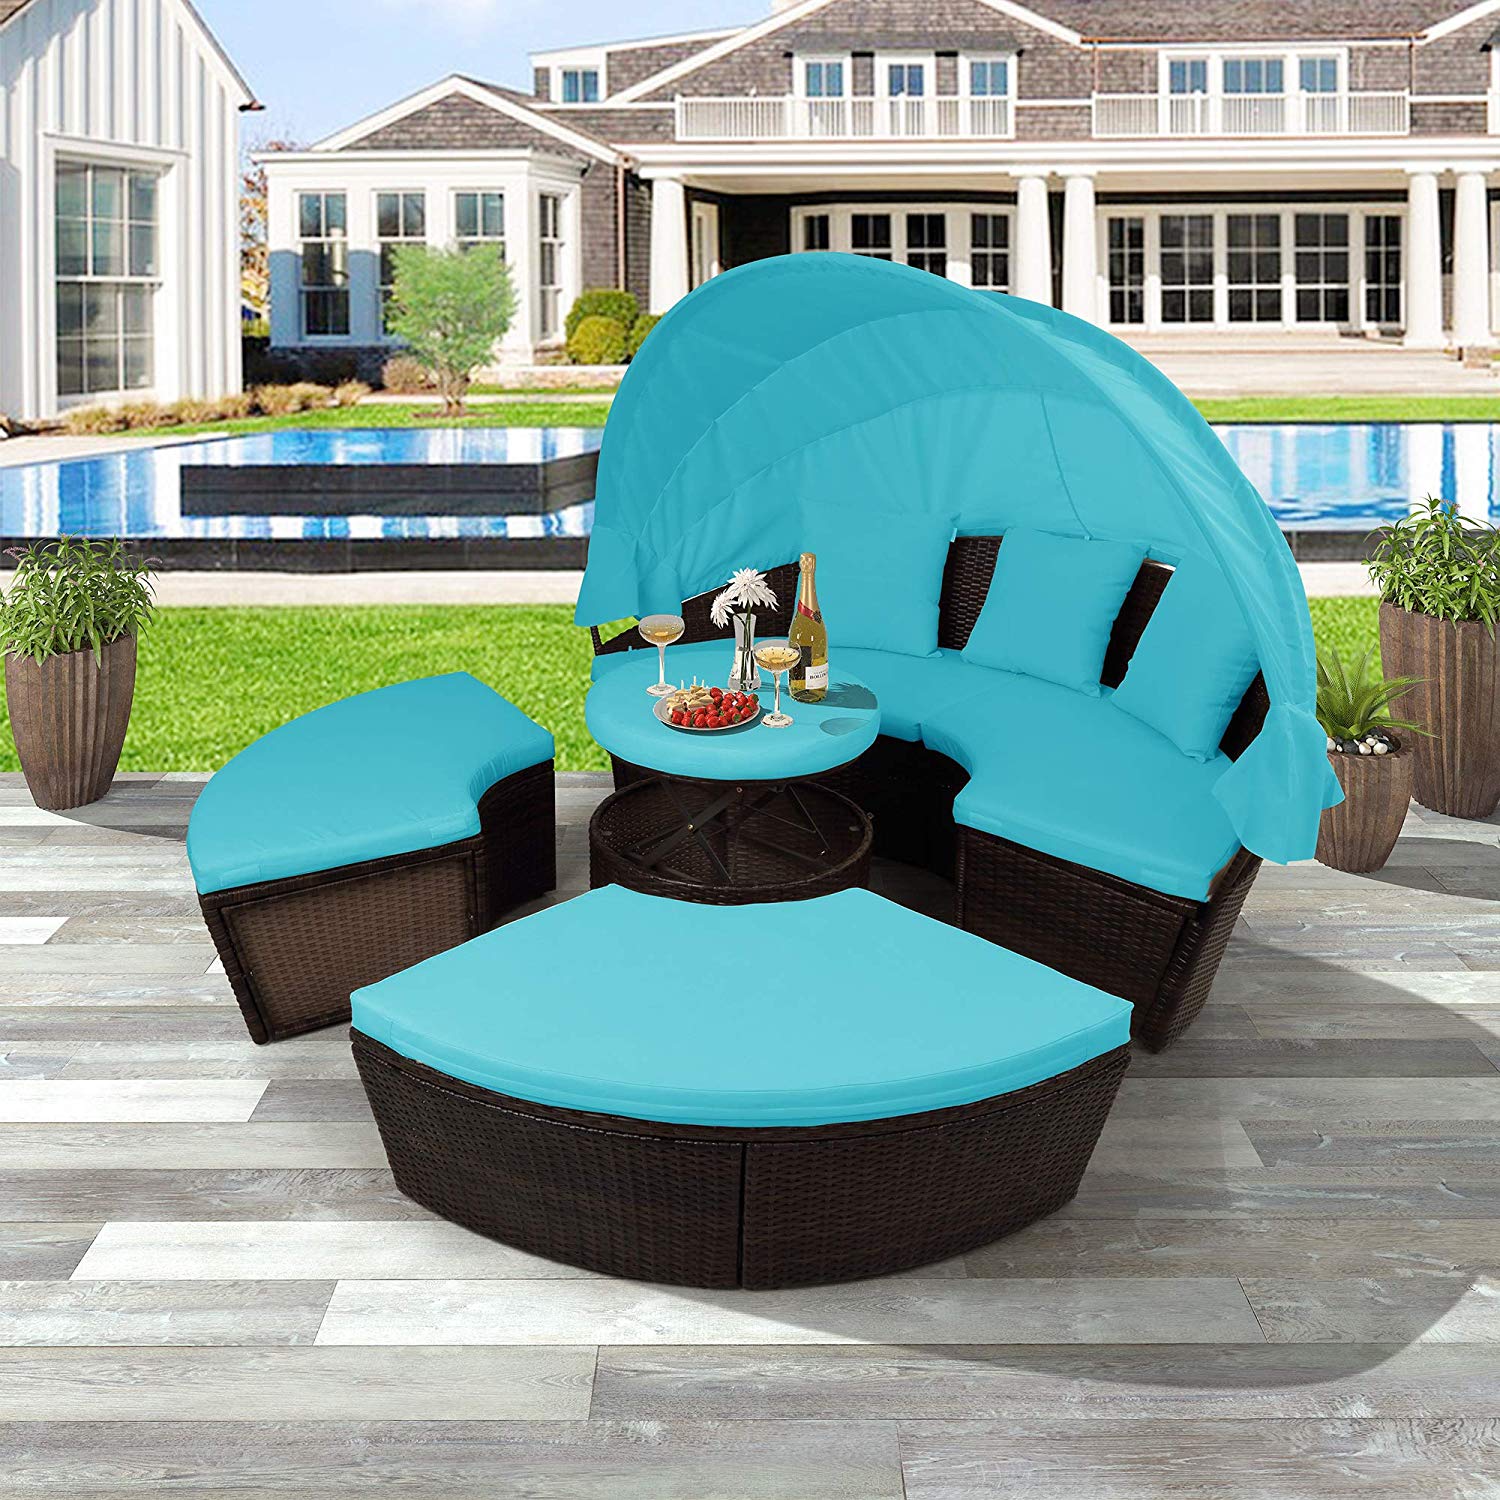 5 Piece Patio Round Wicker Sectional Sofa Set with Retractable Canopy